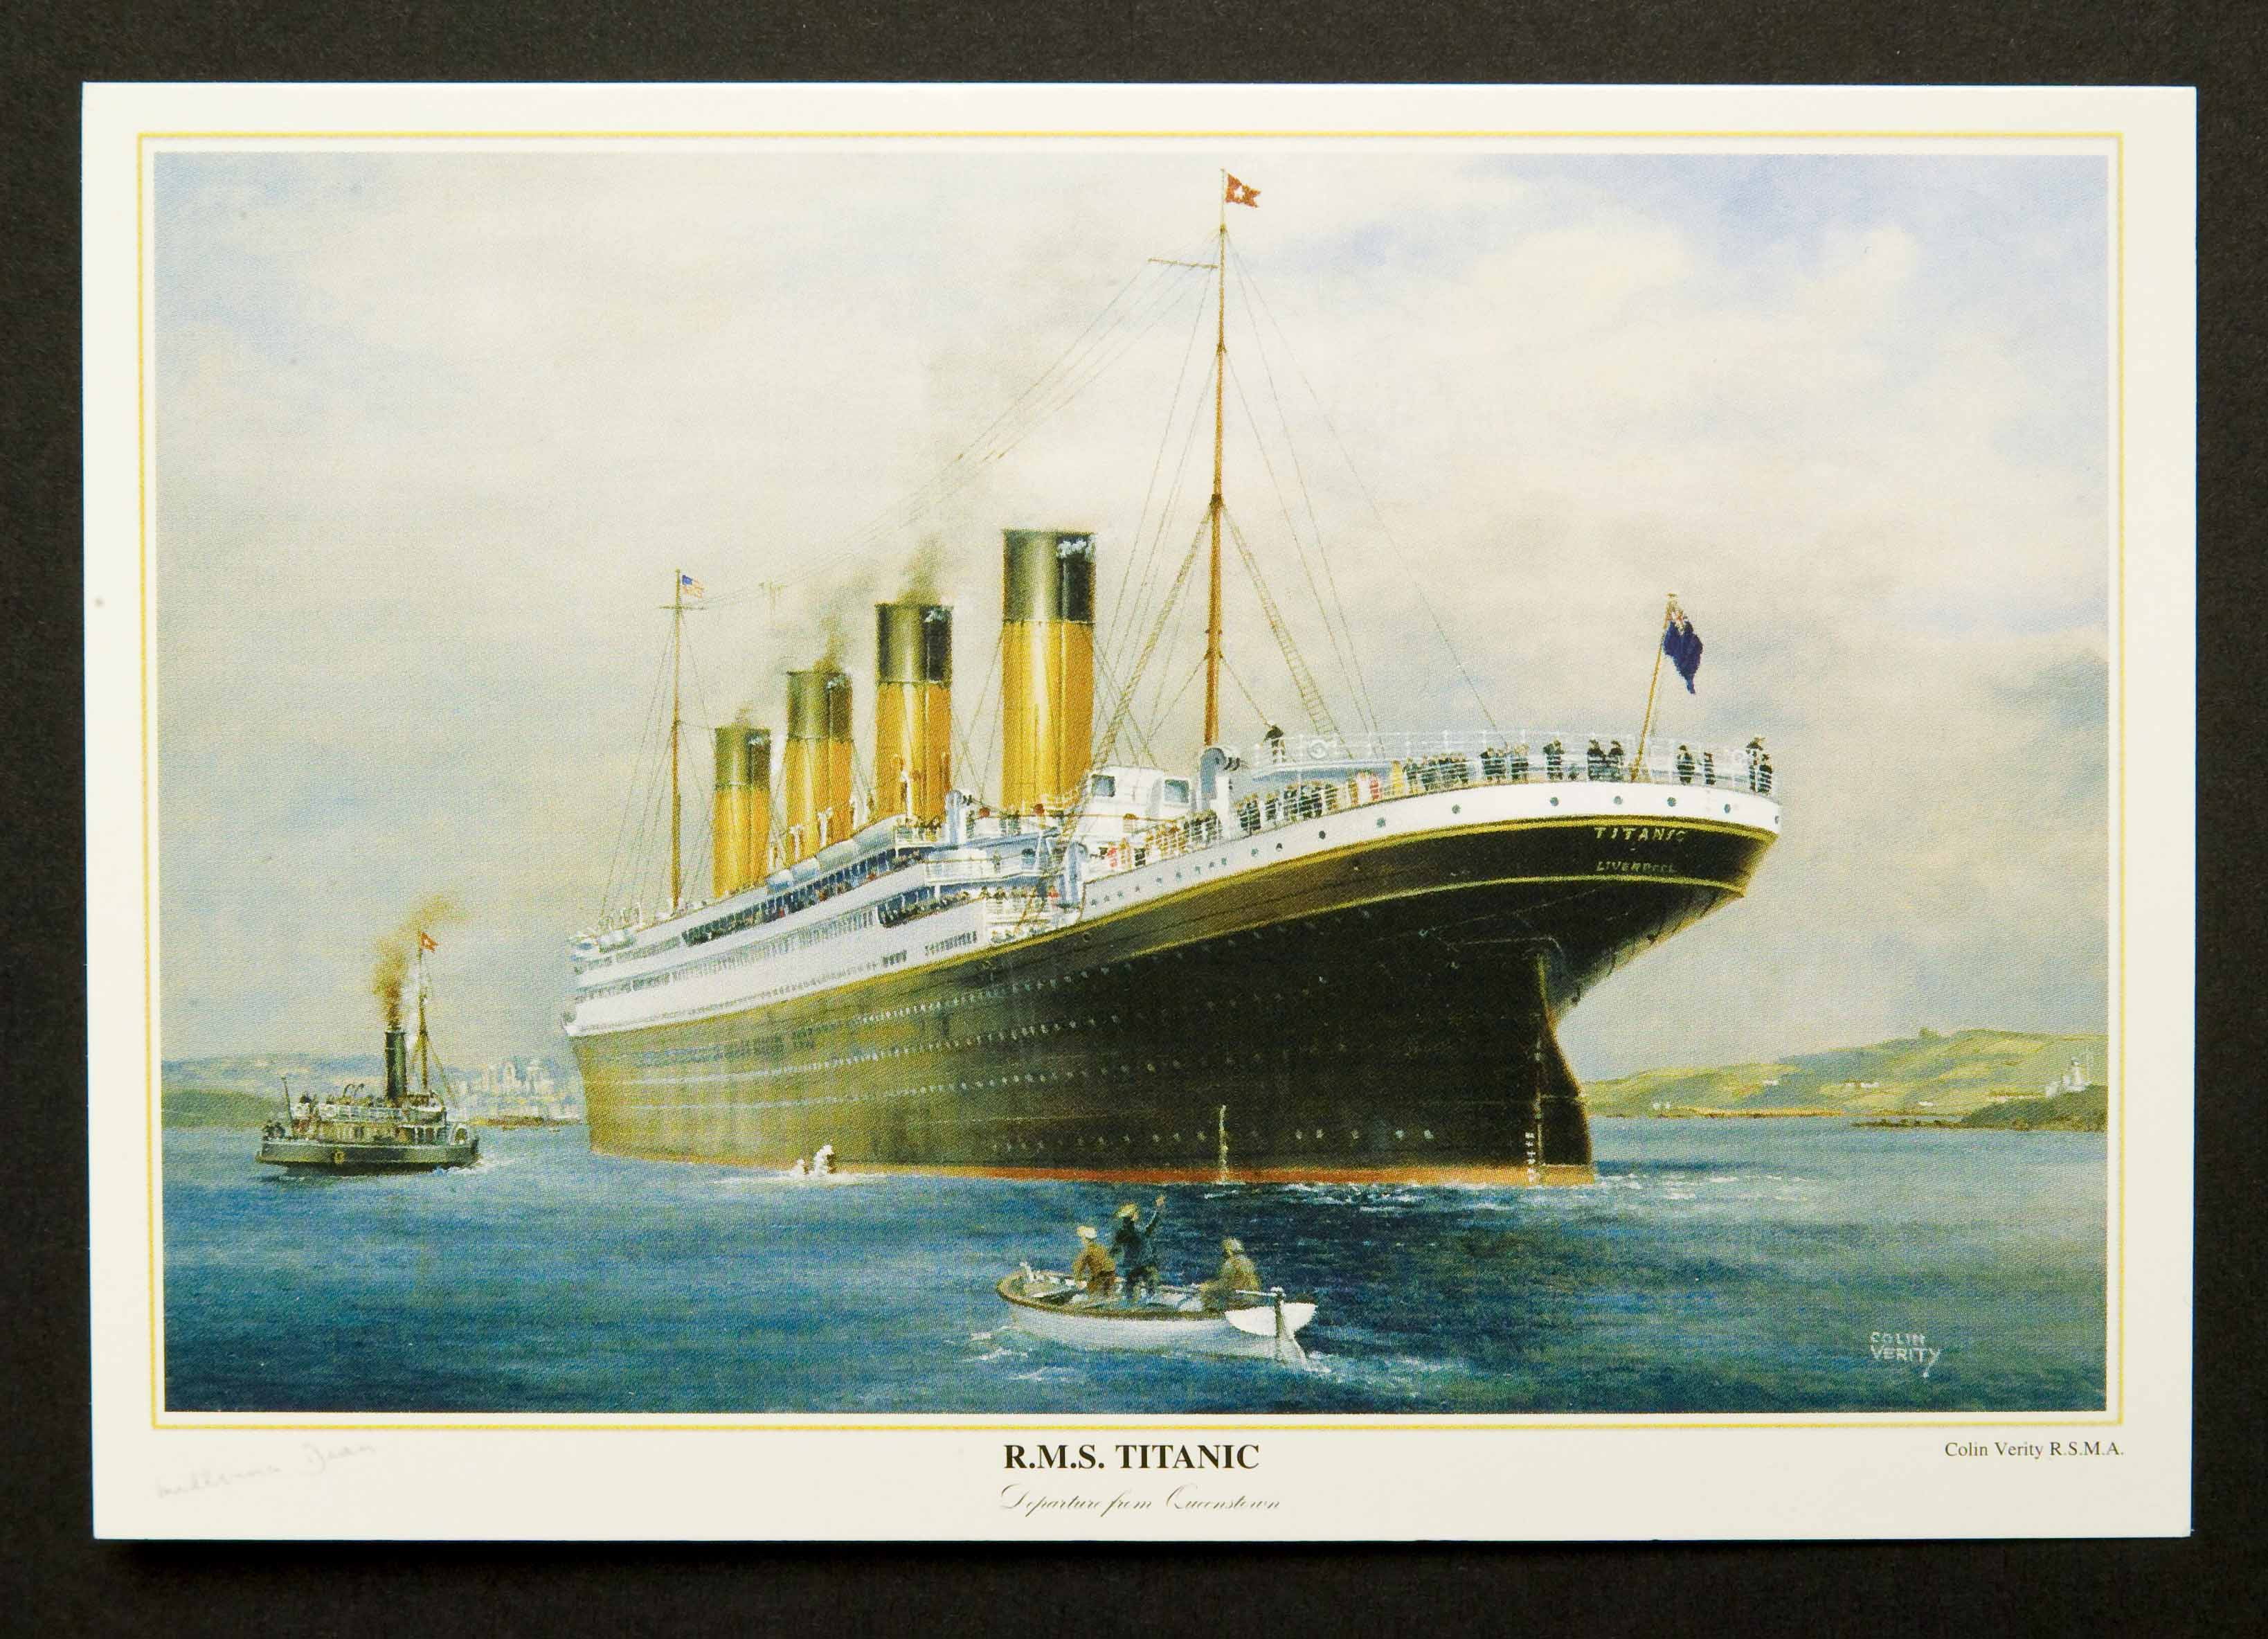 " R.M.S. Titanic" Postcards (6) by Colin Verity - Click Image to Close